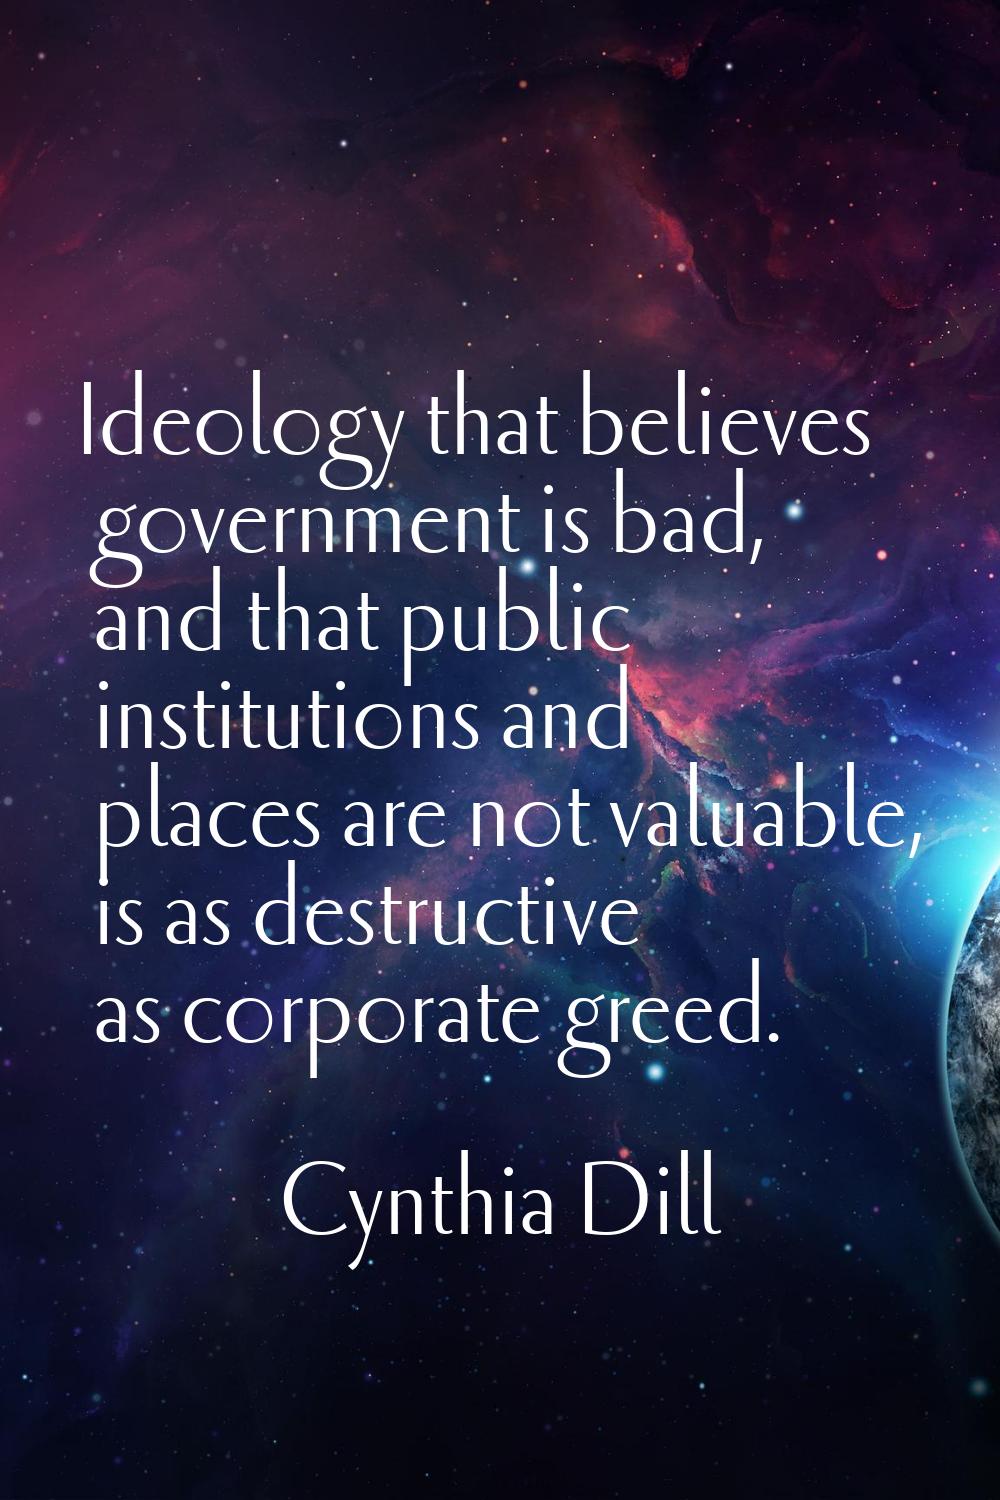 Ideology that believes government is bad, and that public institutions and places are not valuable,